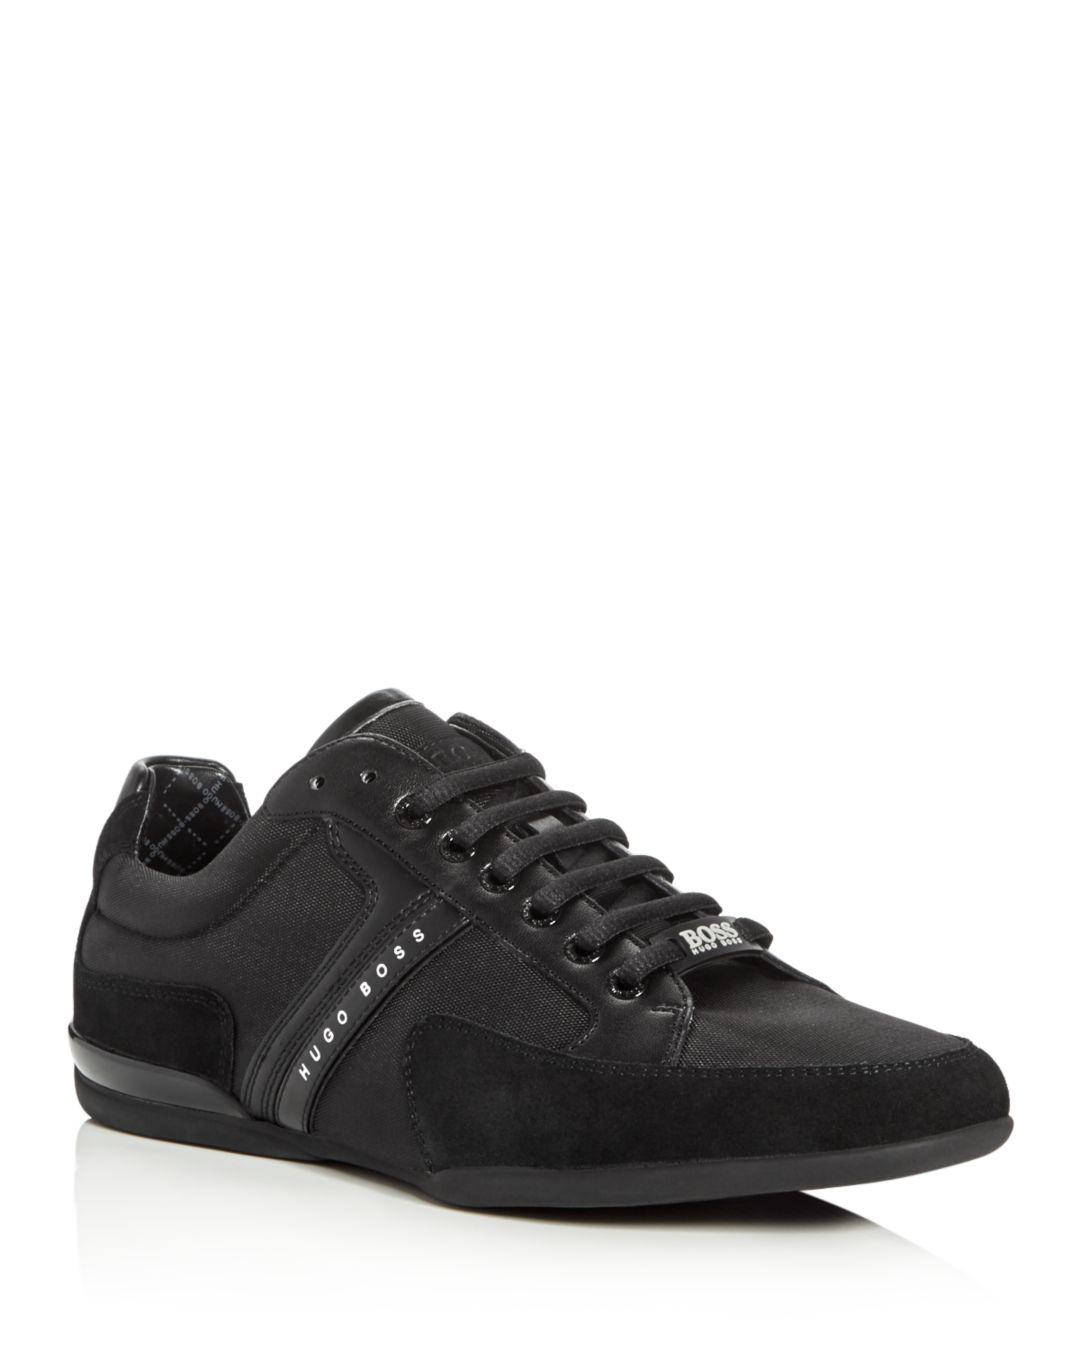 Boss Spacit Sneakers Cheap Sale, SAVE 55%.